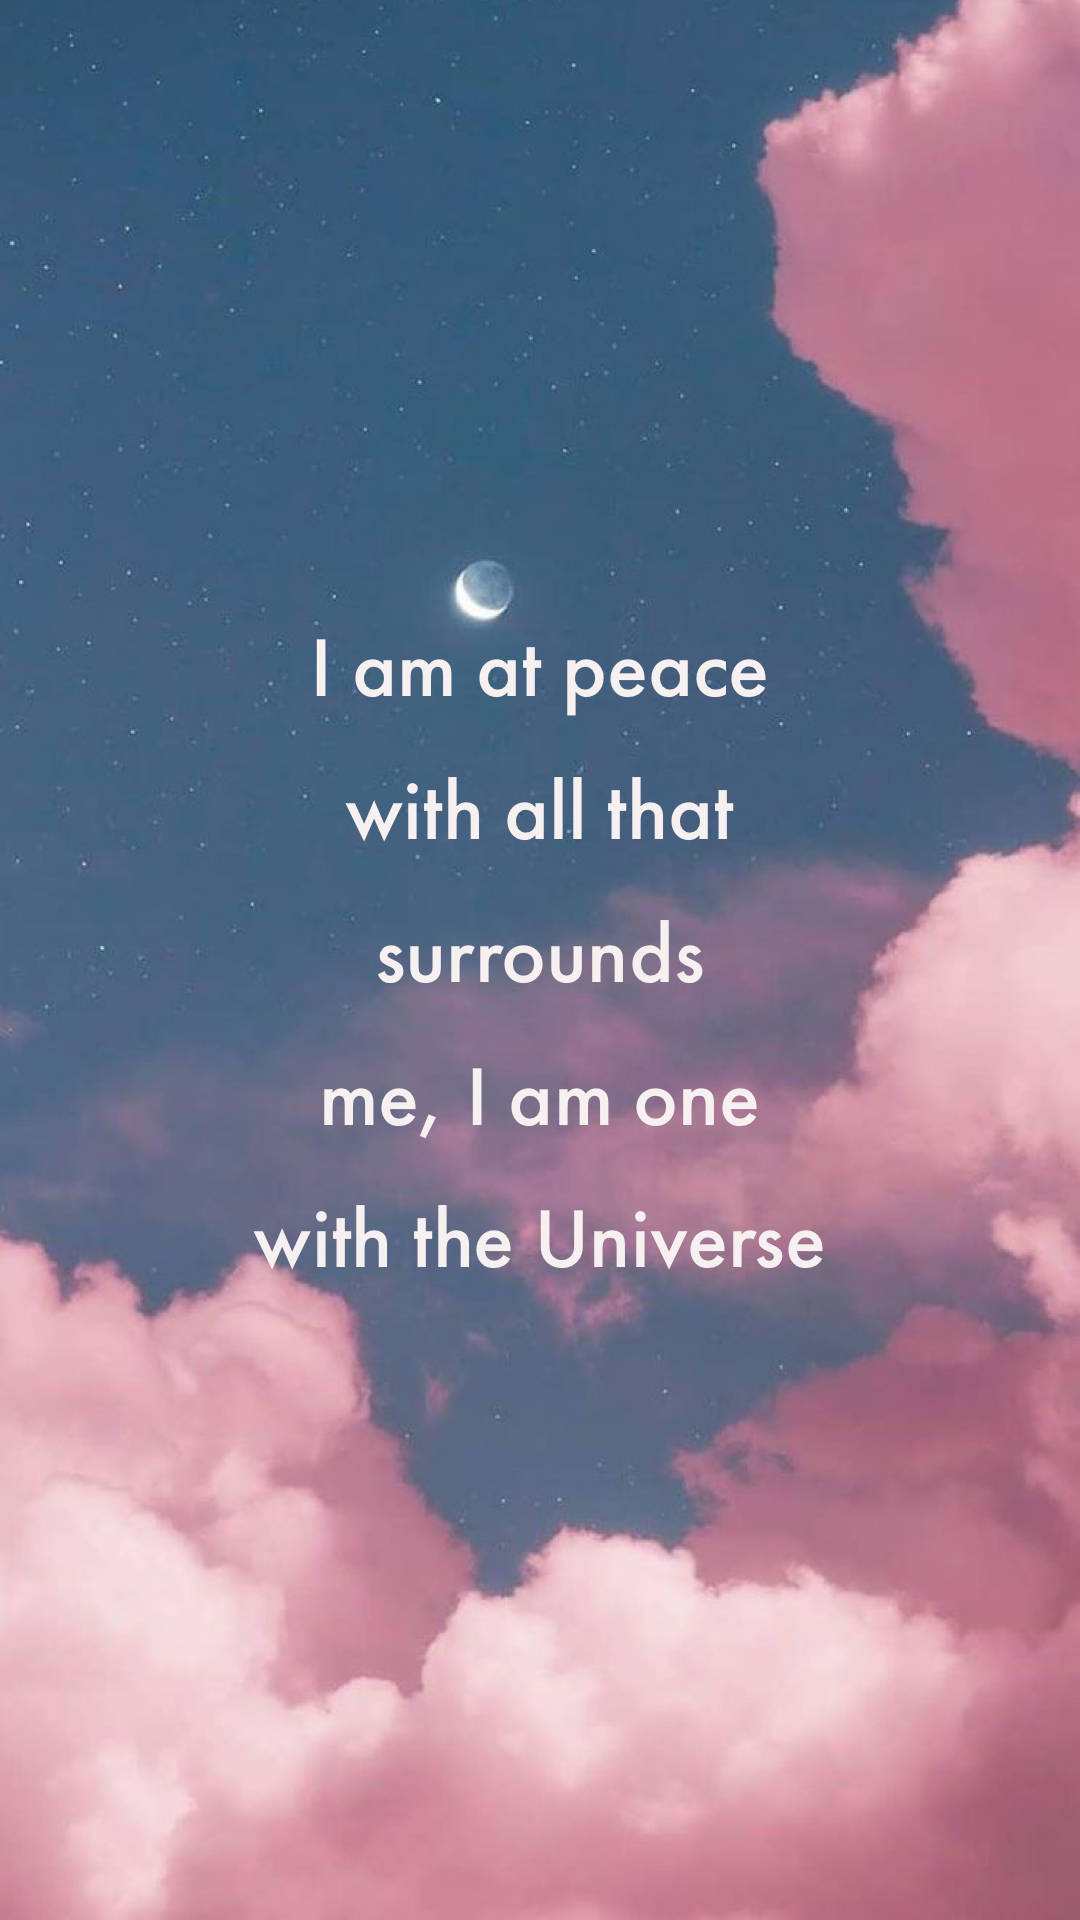 At Peace Affirmation Wallpaper